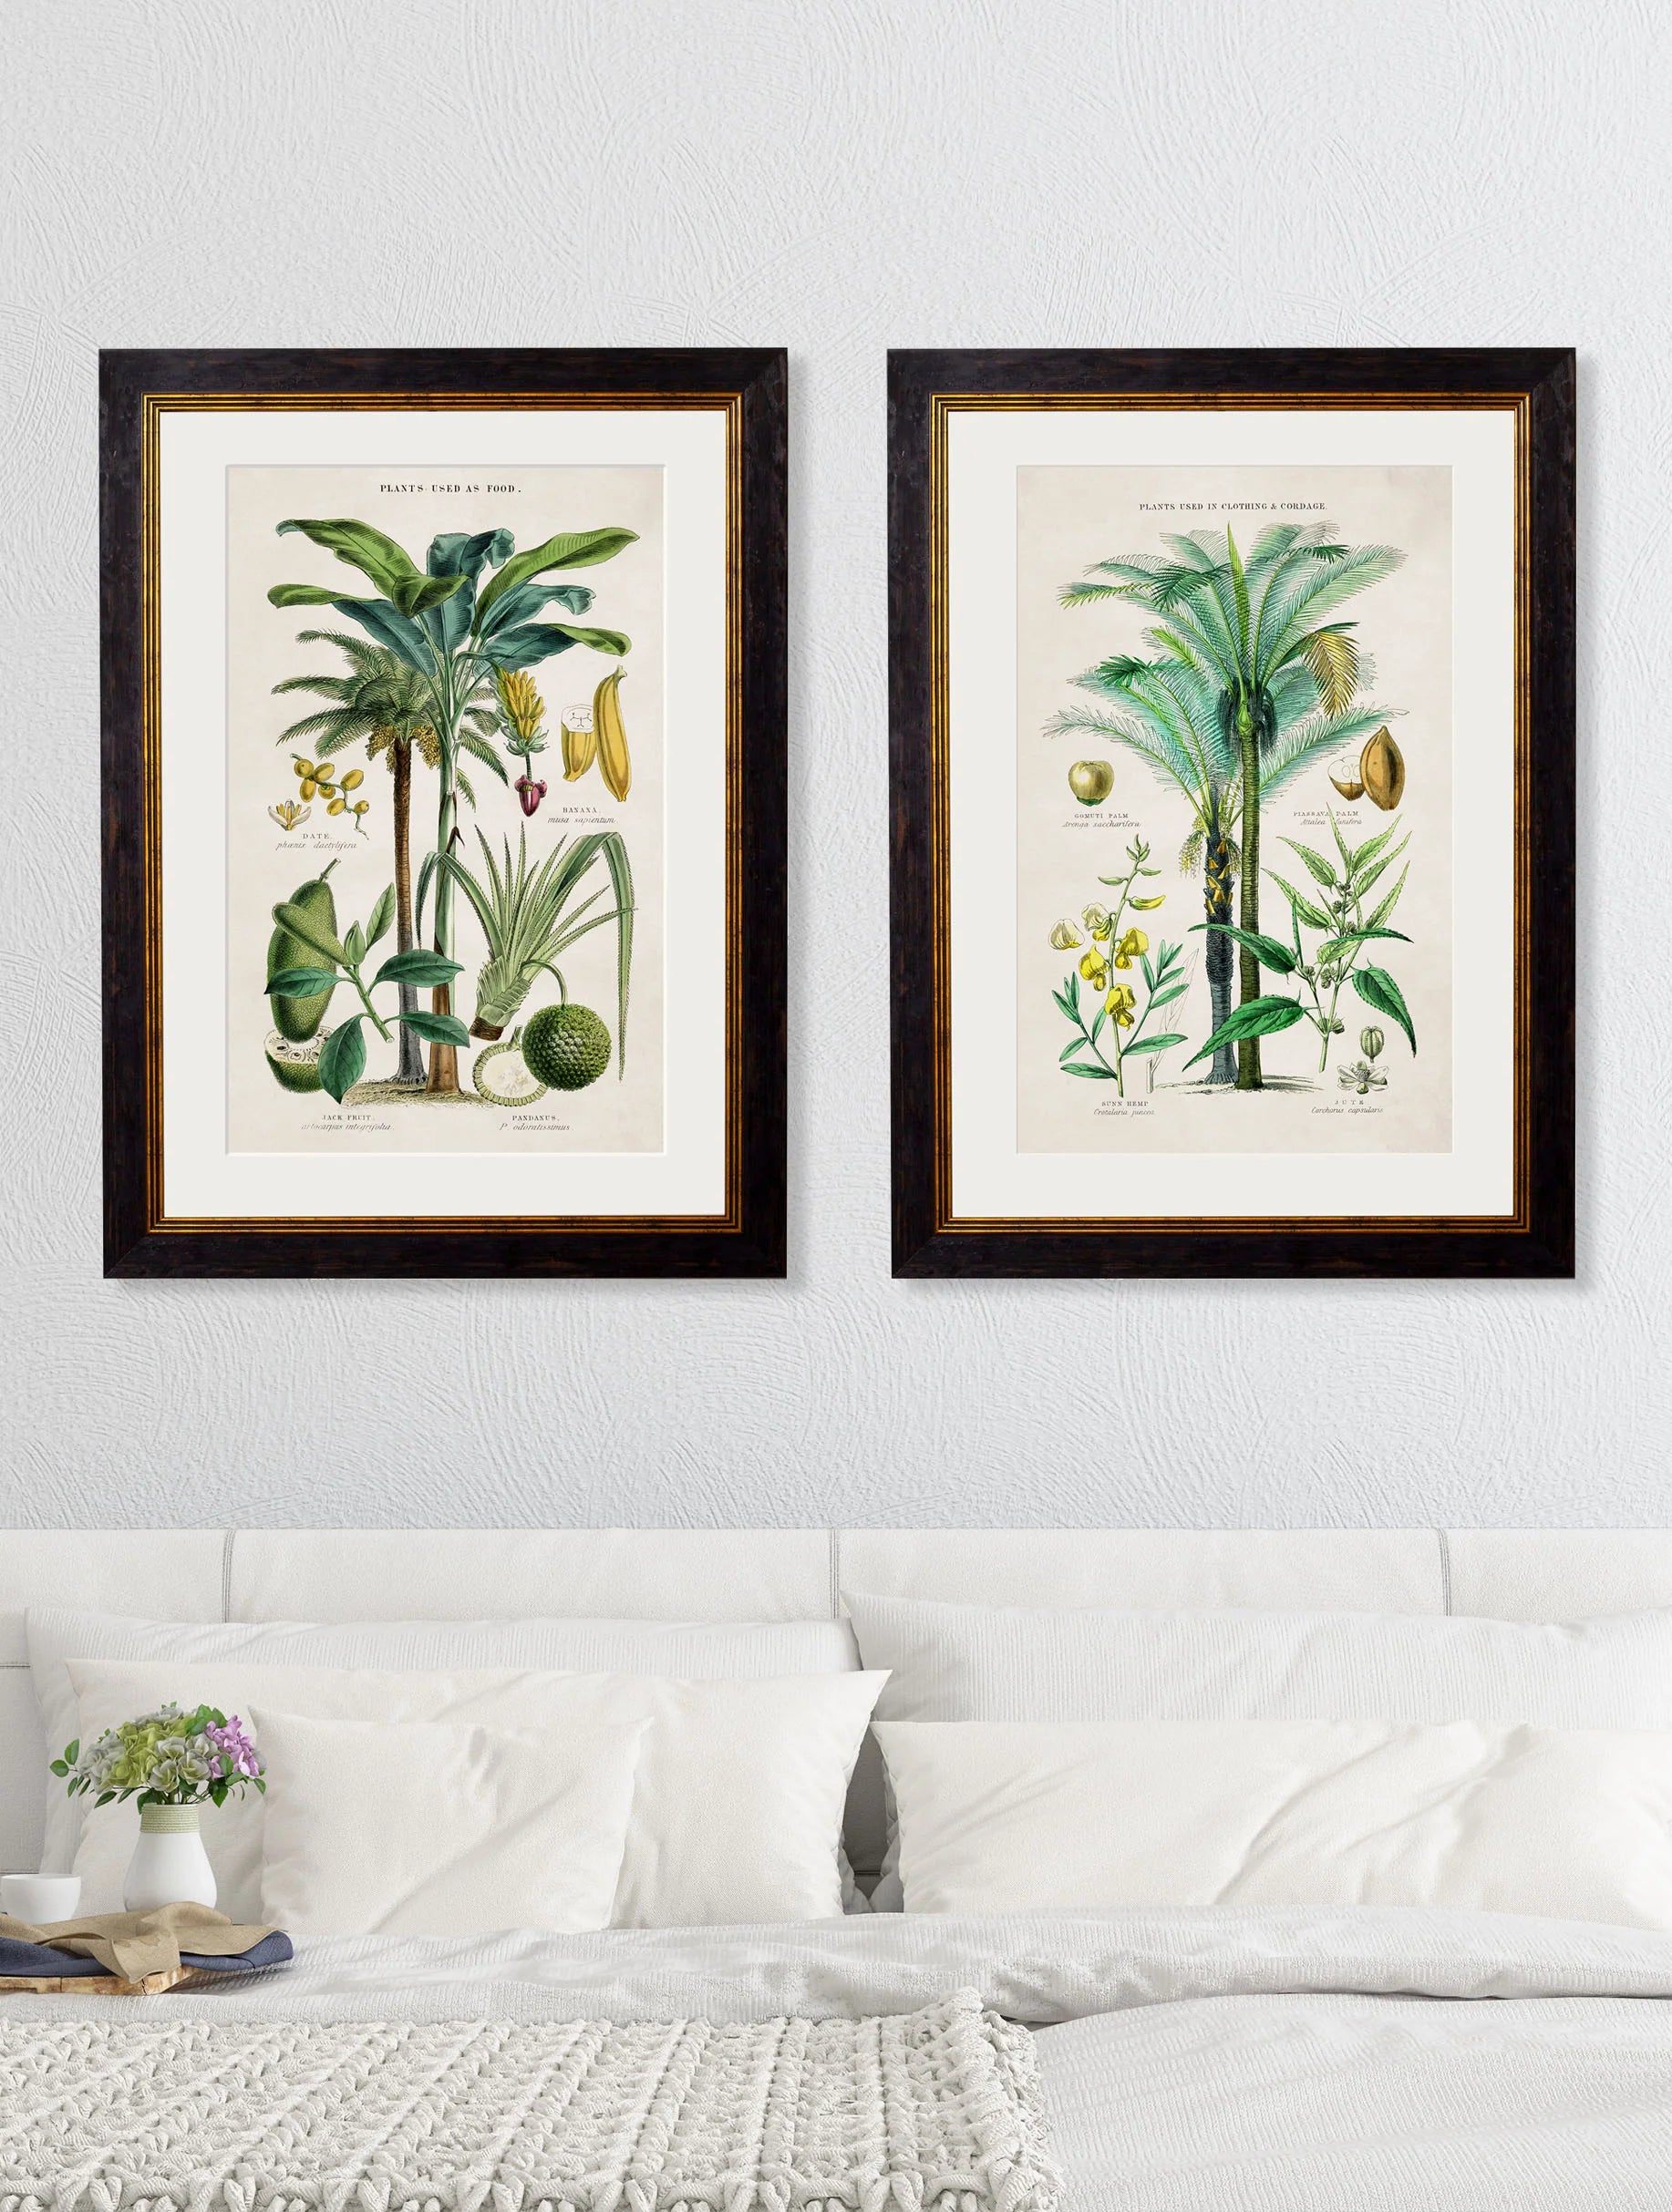 Collection of Tropical Plants Used as Food and Clothing c.1877 Framed Prints